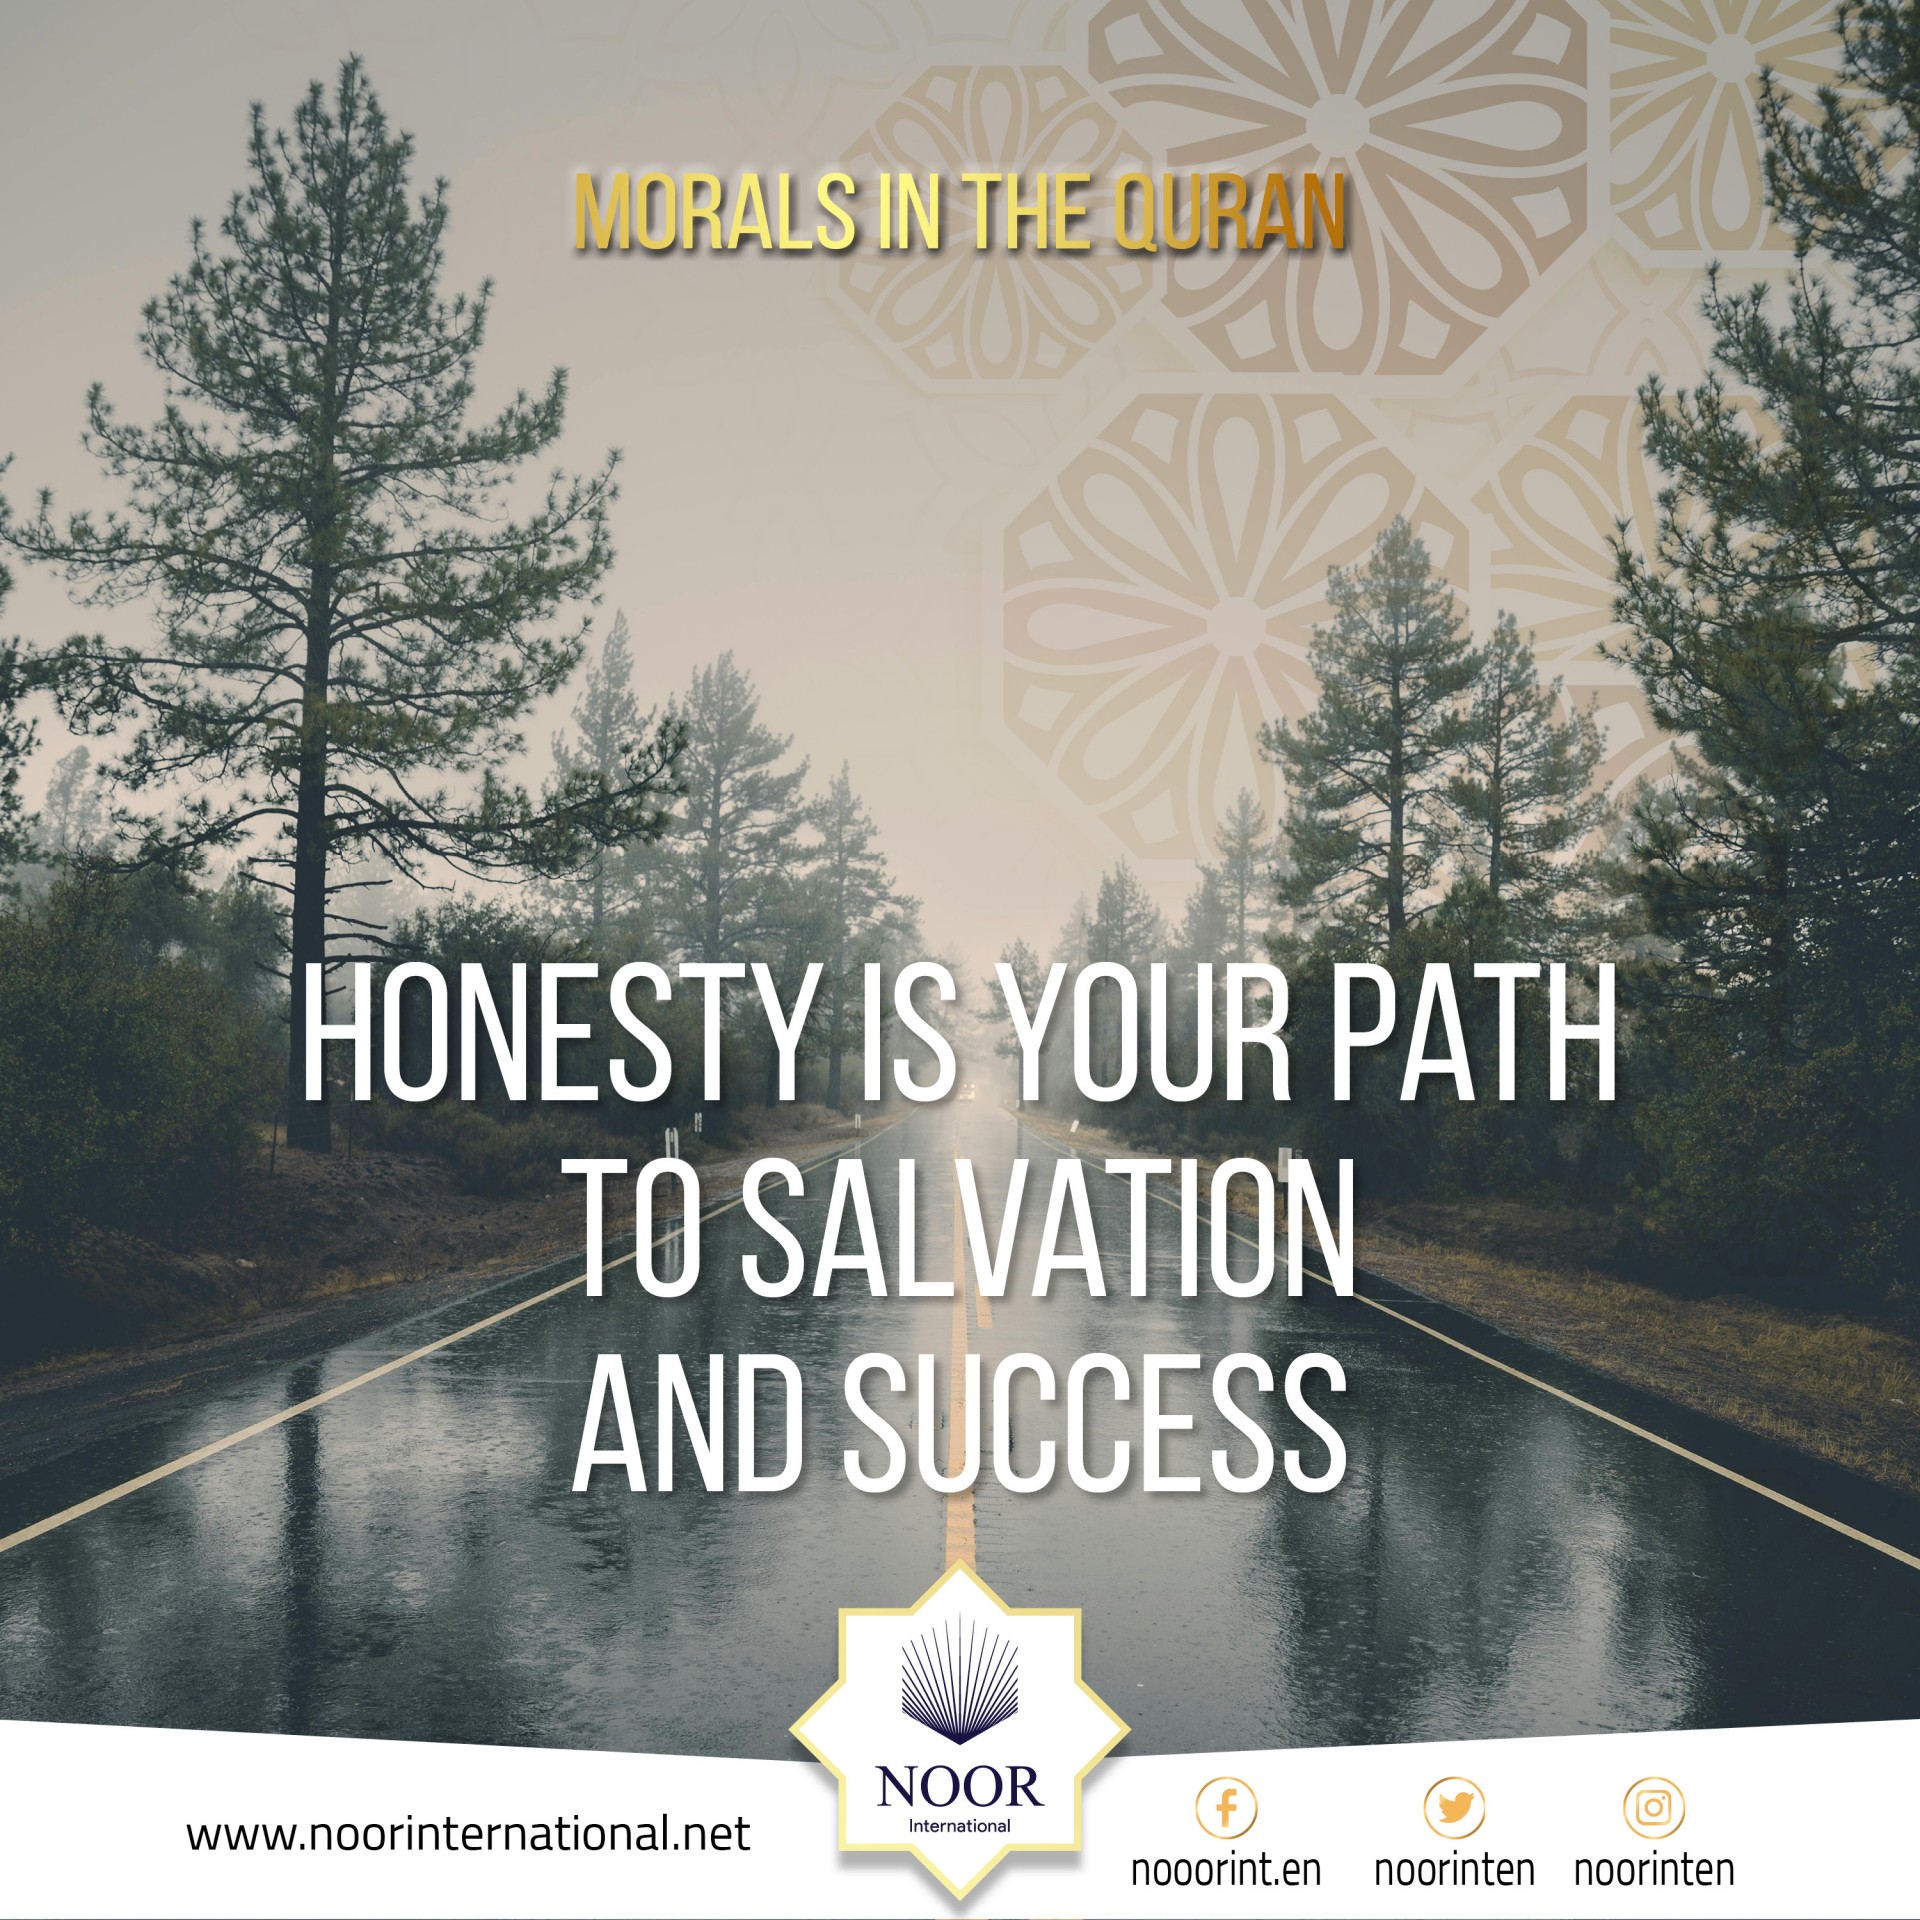 "Honesty is your path to salvation and success.